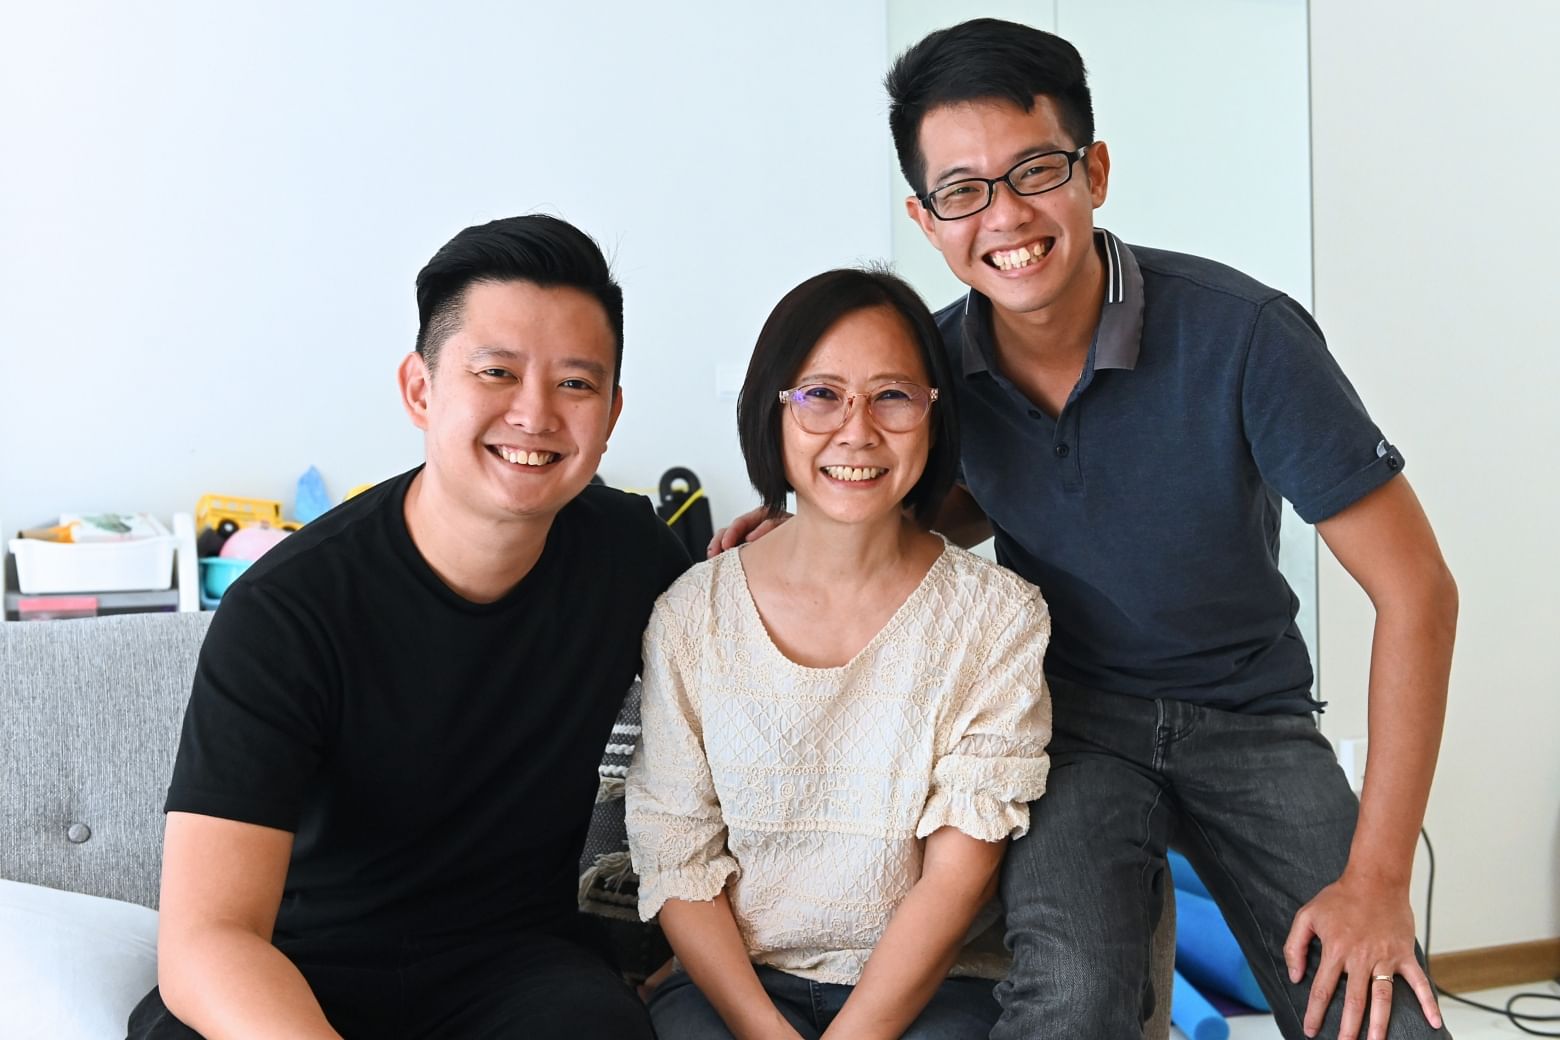 Support from his family helped Mr Benjamin Yeo reach his full potential